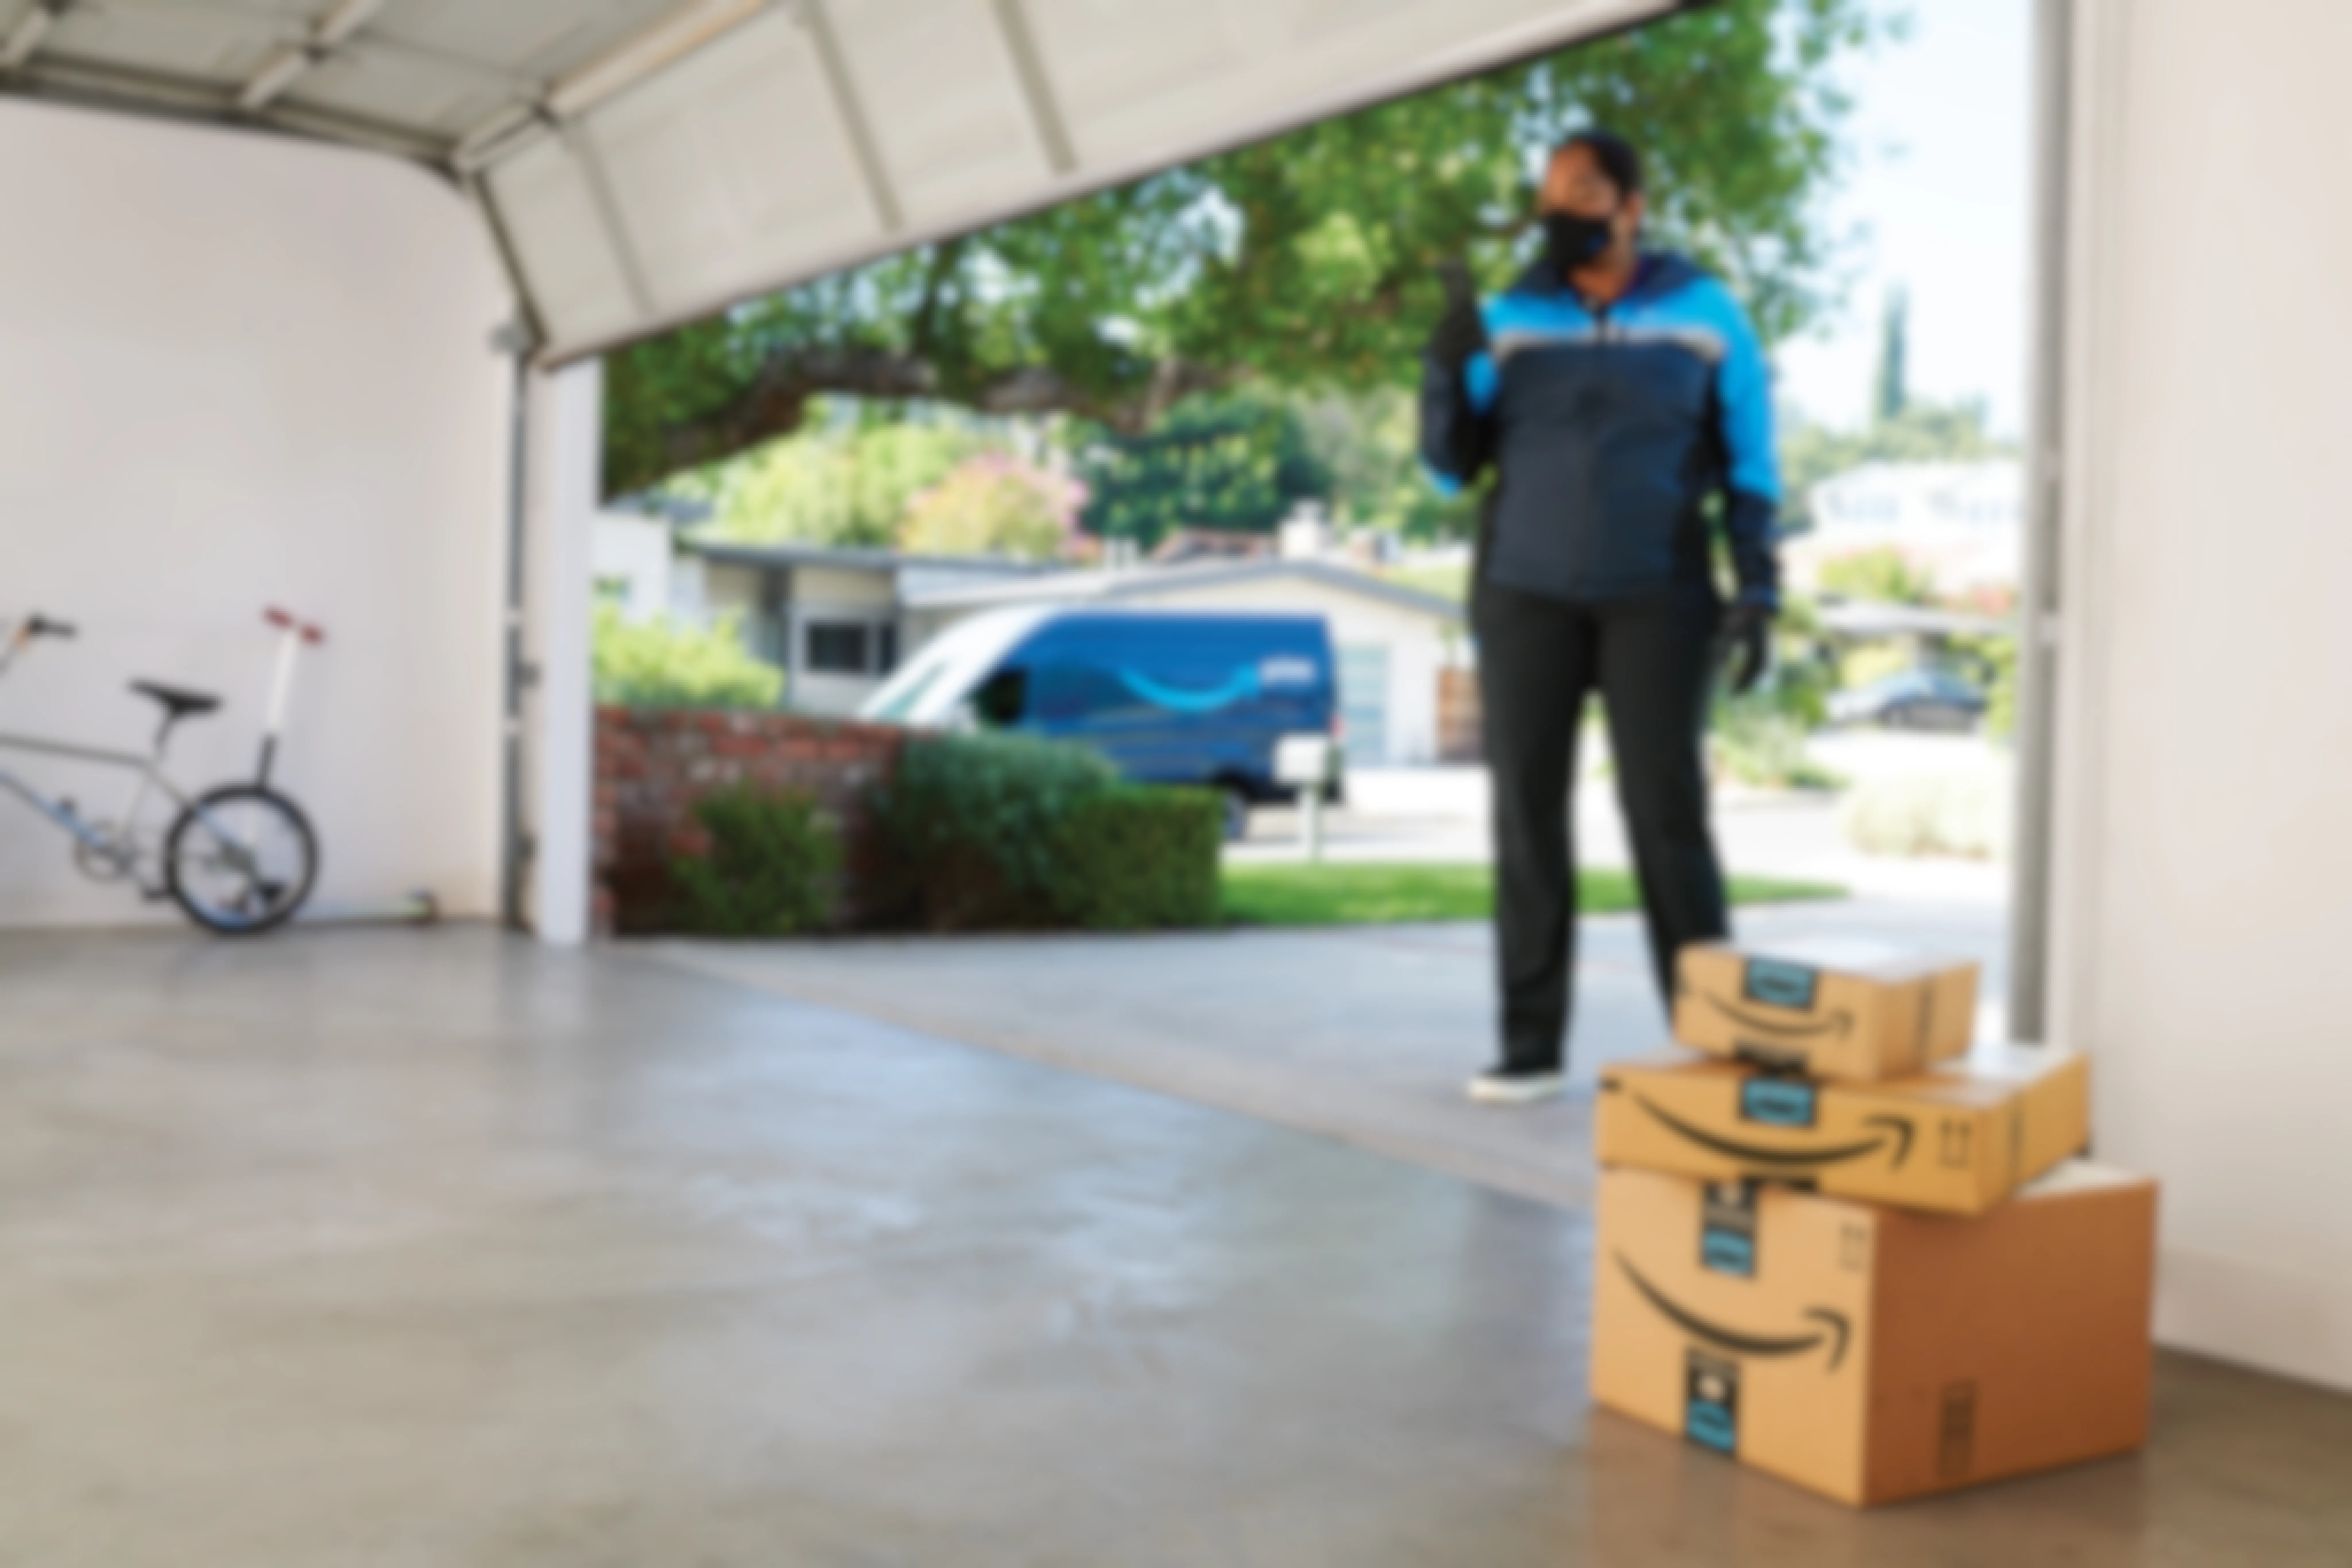 An Amazon delivery driver using the Key for garage delivery option to put Amazon packages inside a garage.